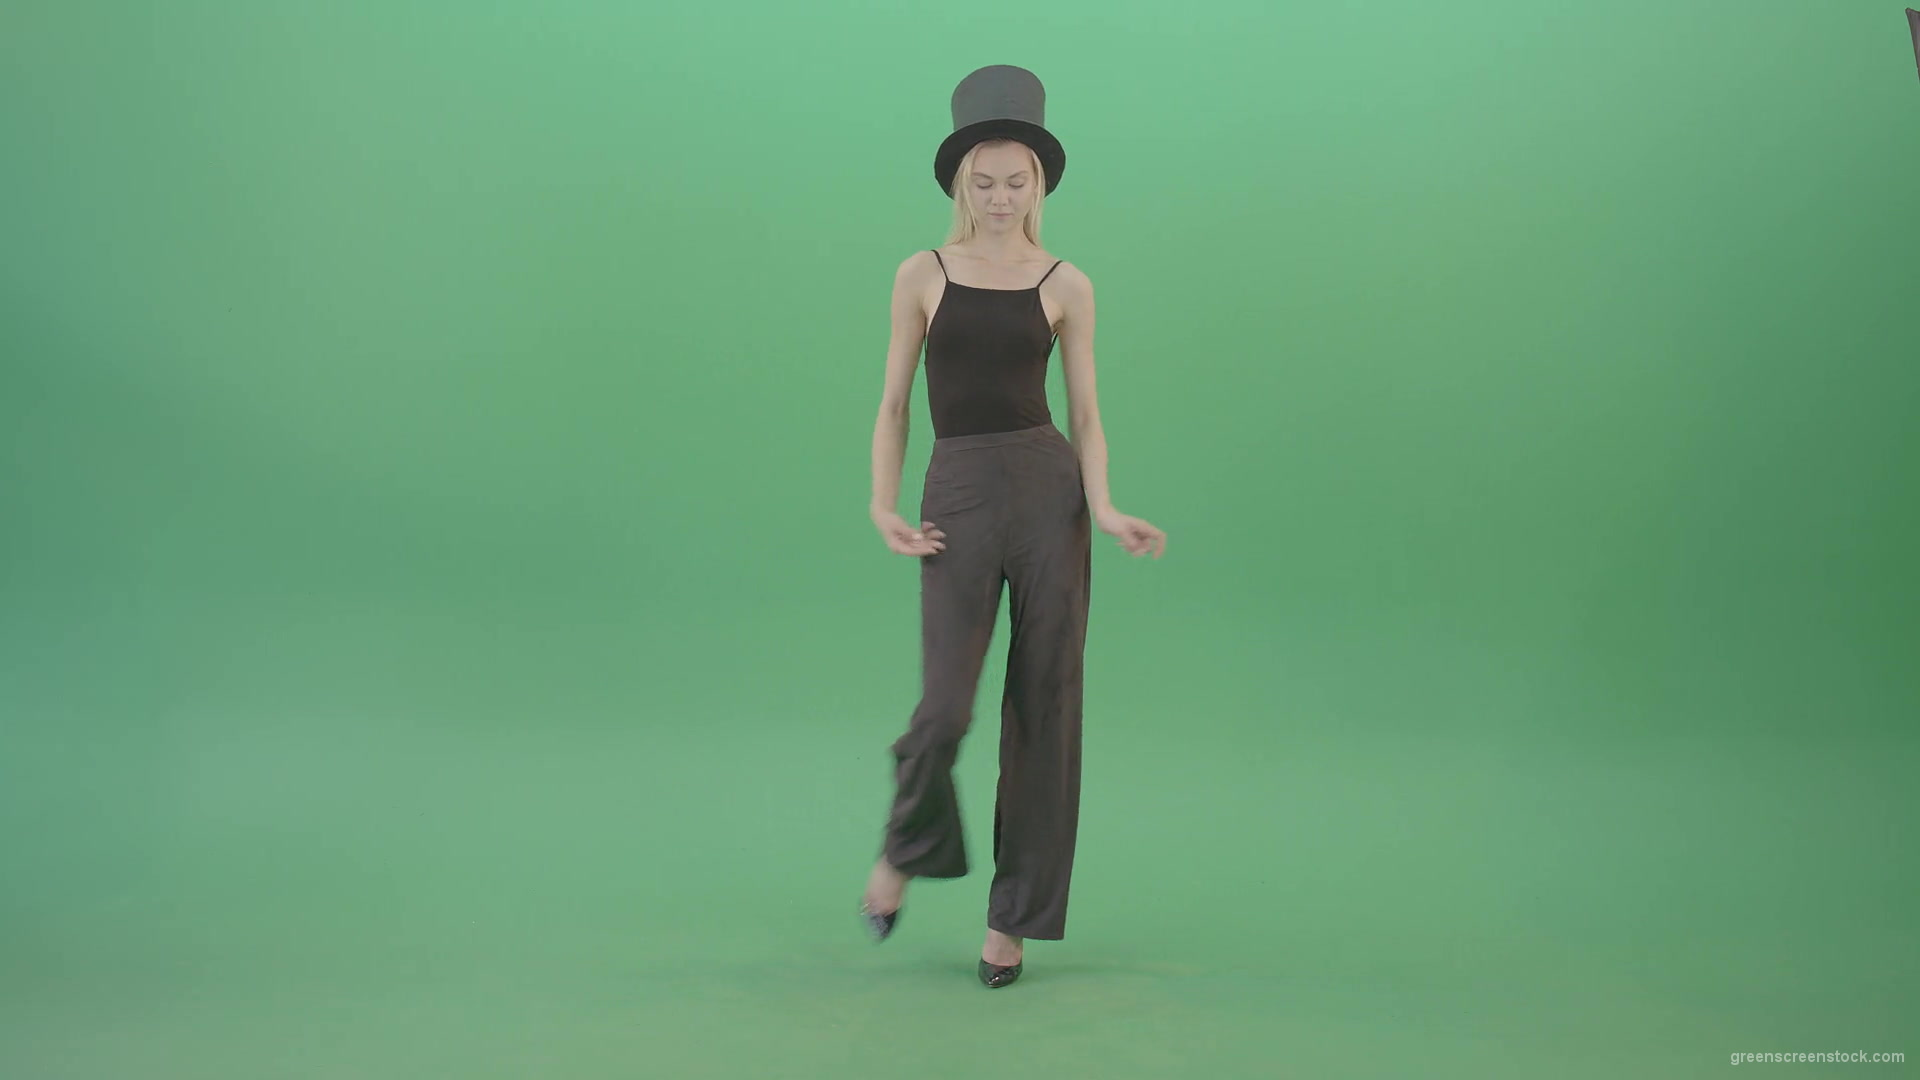 Girl-with-black-busines-cylinder-hat-dancing-isolated-on-green-background-4K-Video-Footage-1920_002 Green Screen Stock